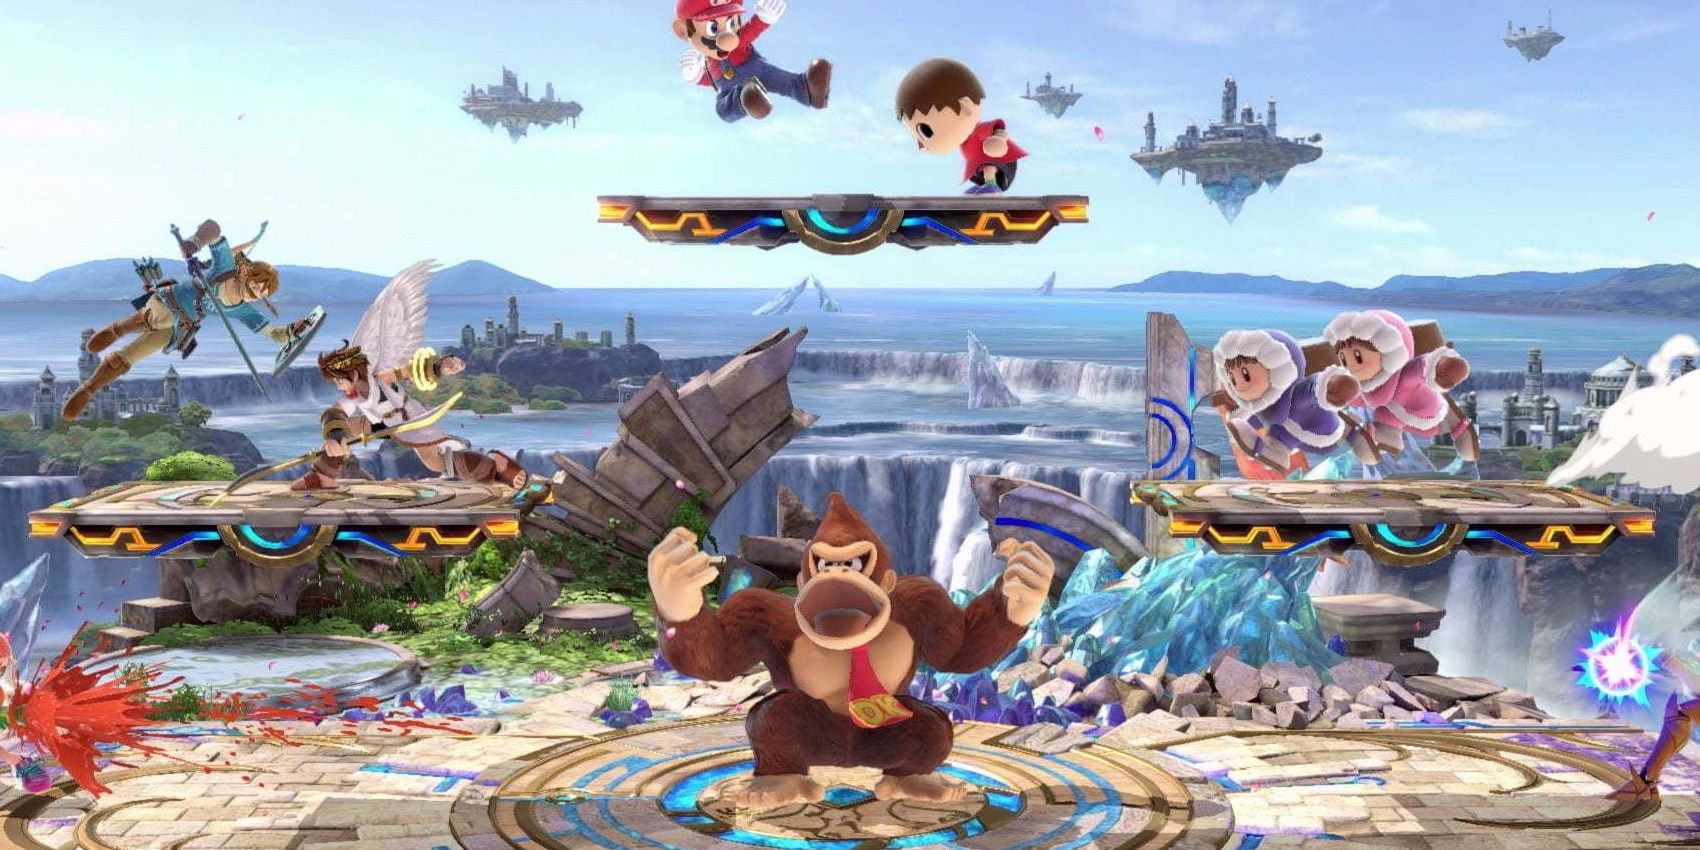 Eight player chaos in Super Smash Bros. Ultimate.